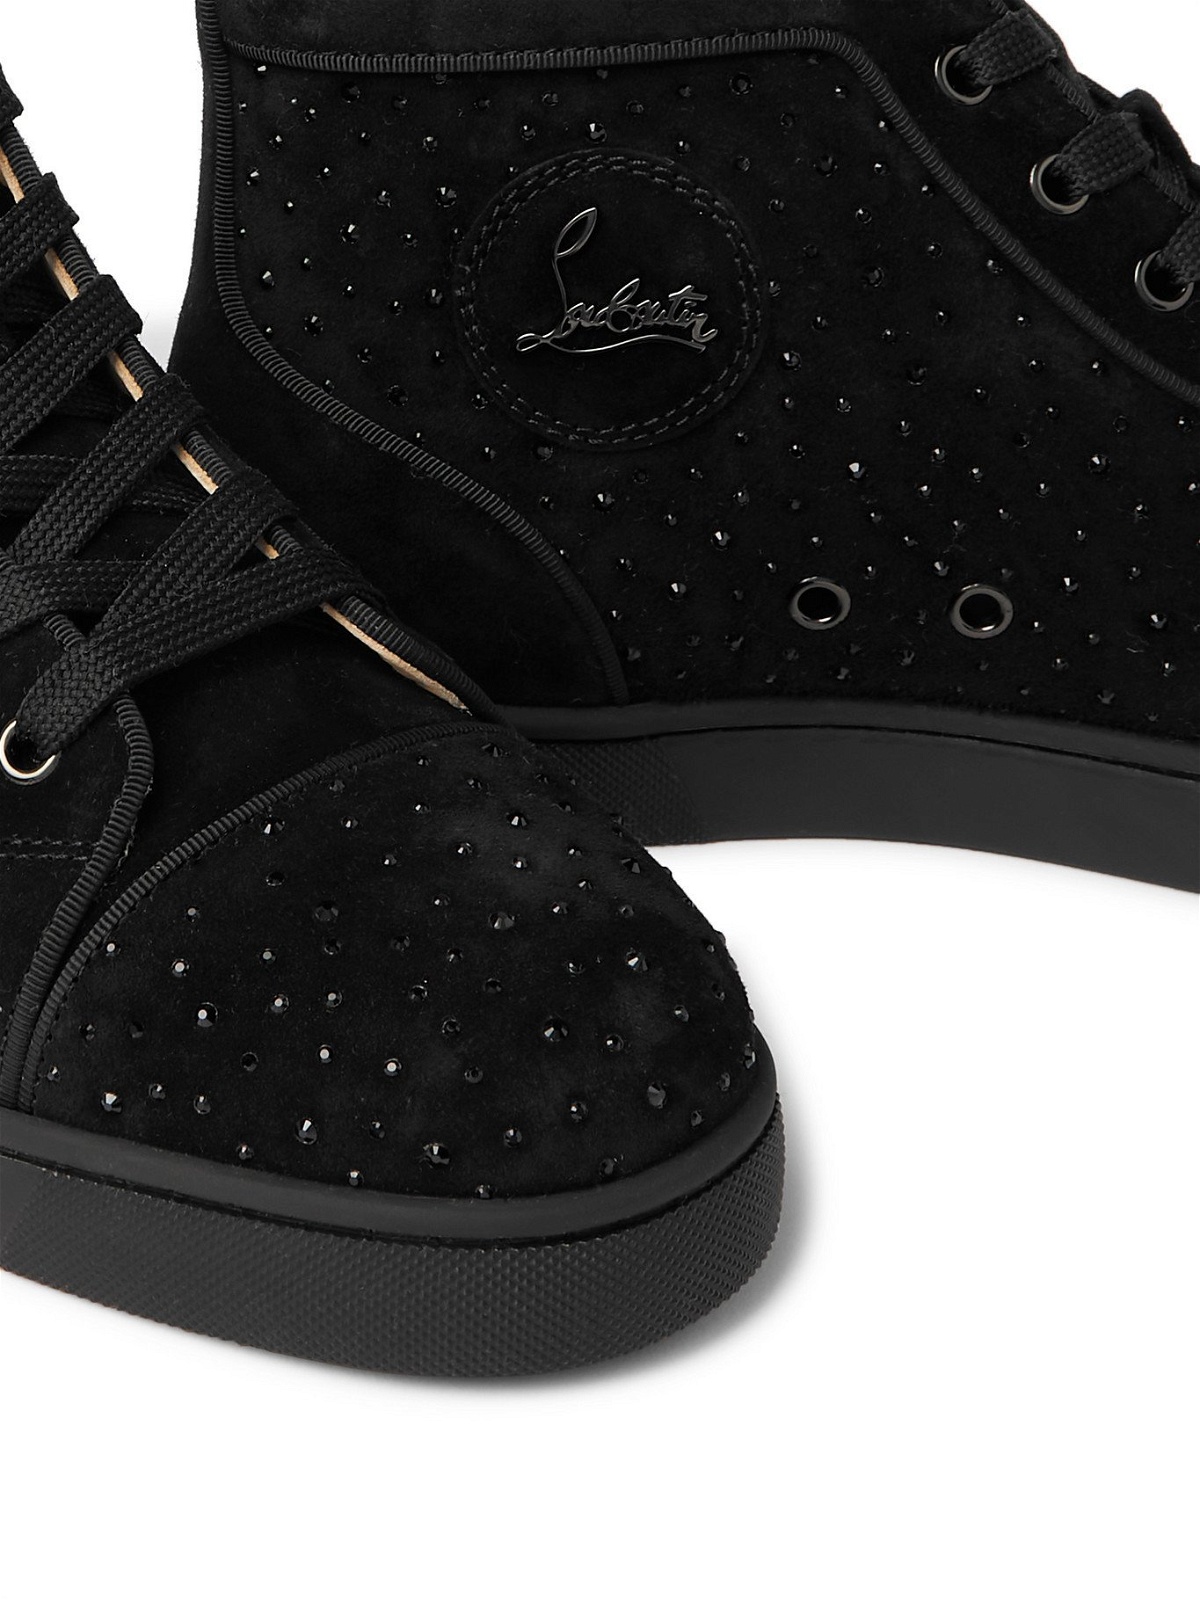 Christian Louboutin Suede Louis Strass High-Top Sneakers - Black - 42